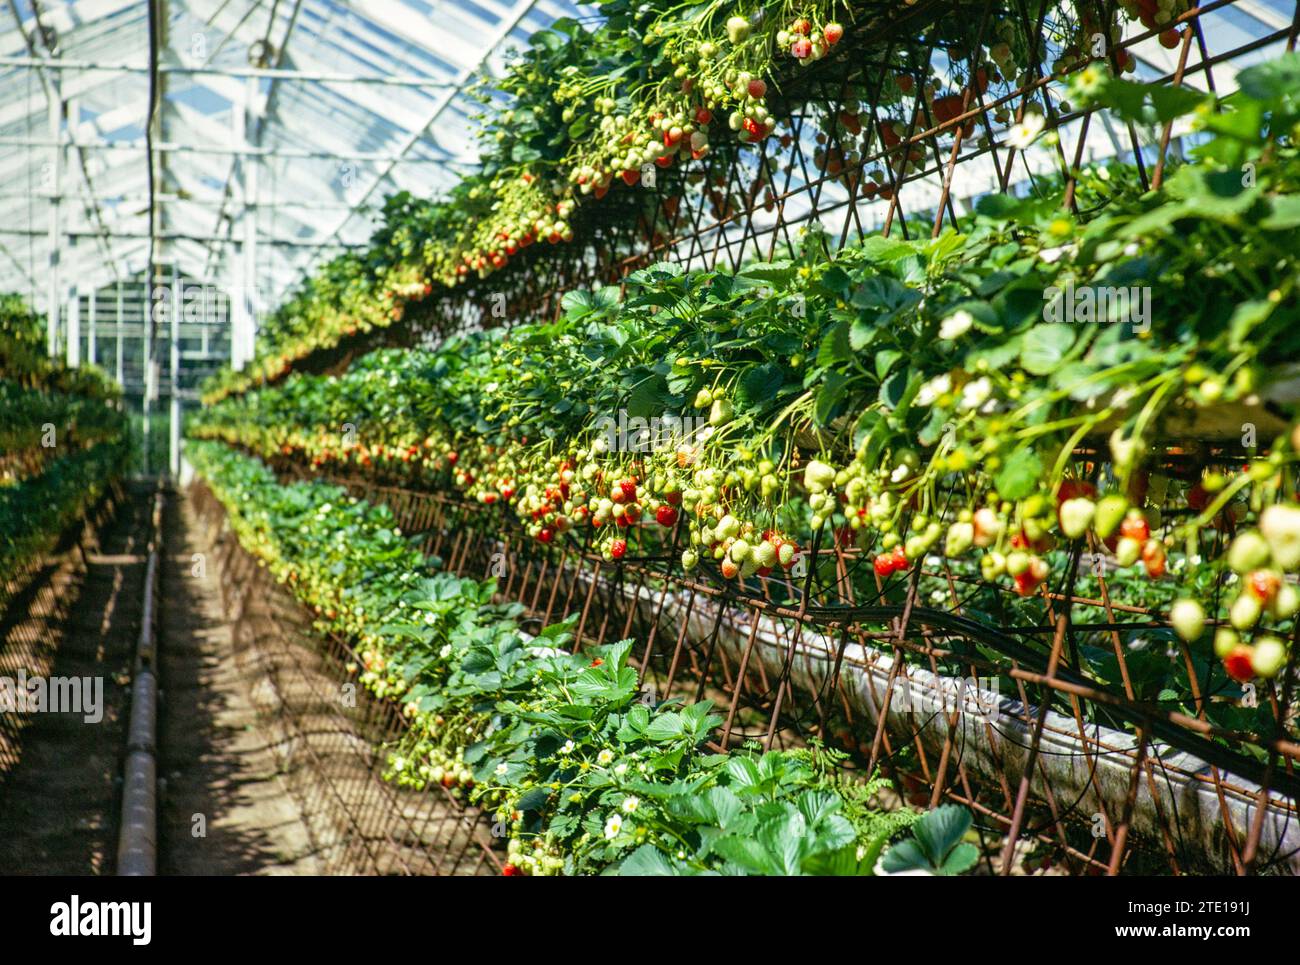 Intensive fruit farming strawberries inside greenhouse, Guernsey, Channel Island, Great Britain, June 1974 Stock Photo